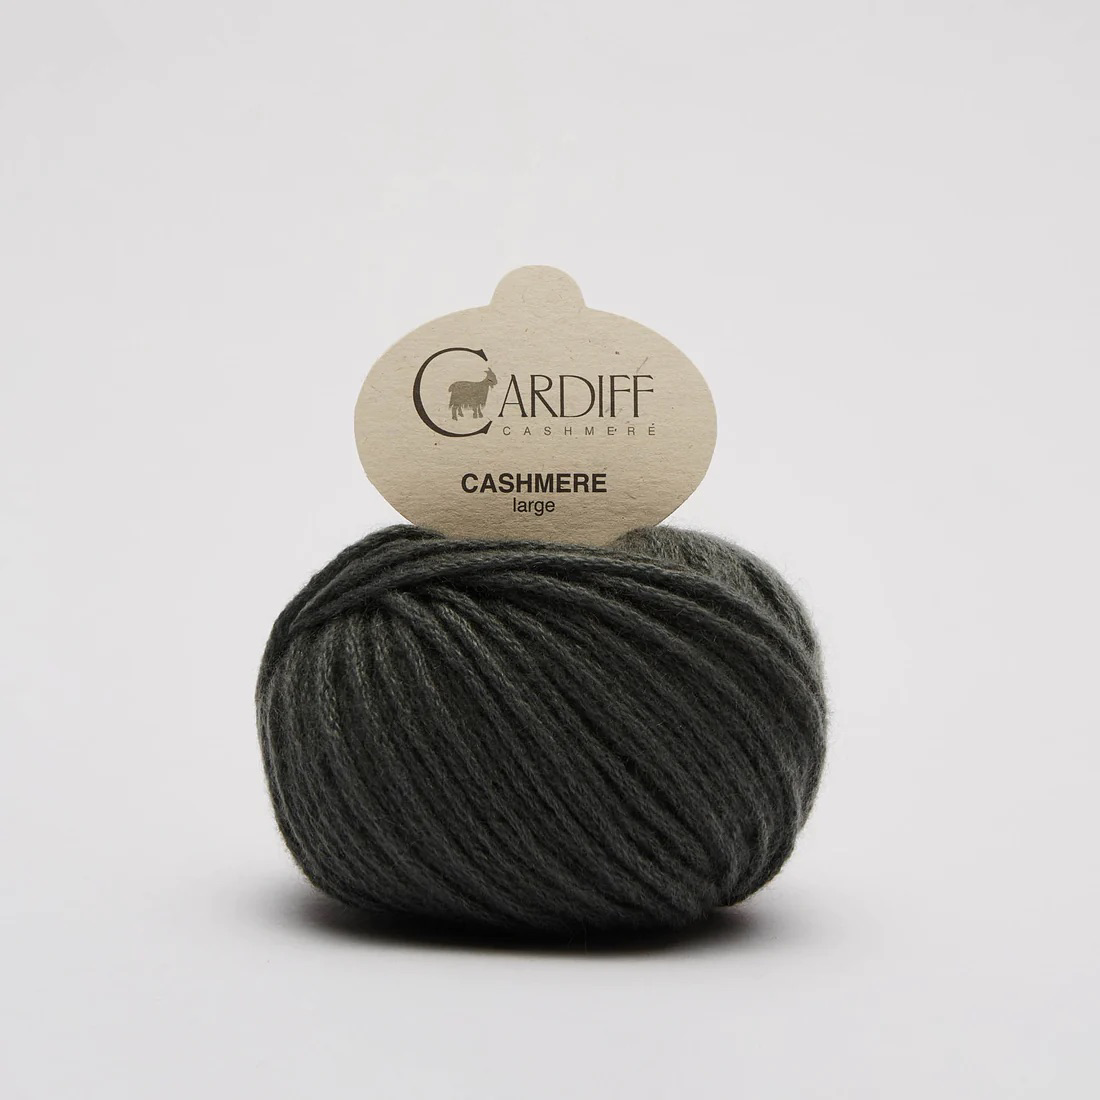 cardiff cashmere stor